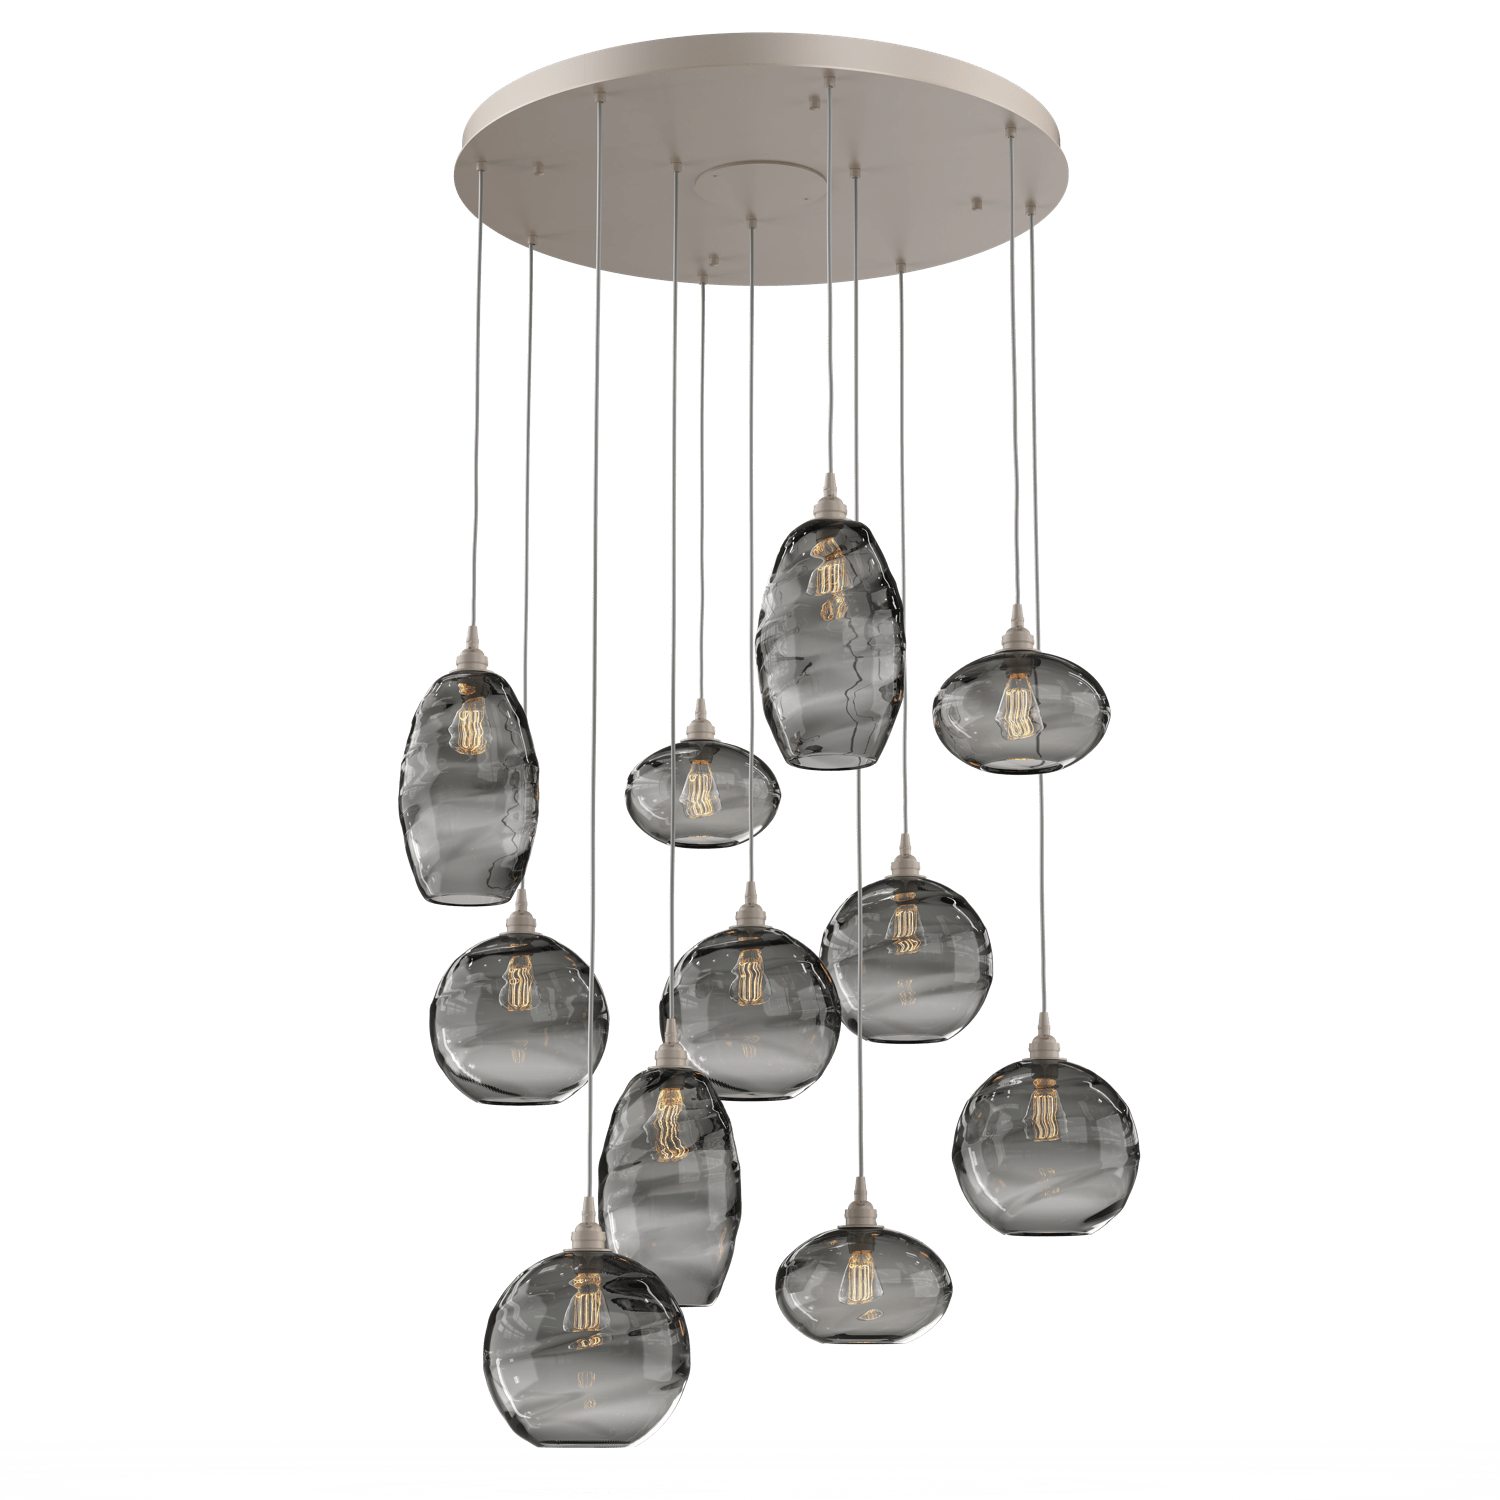 CHB0048-11-BS-OS-Hammerton-Studio-Optic-Blown-Glass-Misto-11-light-round-pendant-chandelier-with-metallic-beige-silver-finish-and-optic-smoke-blown-glass-shades-and-incandescent-lamping